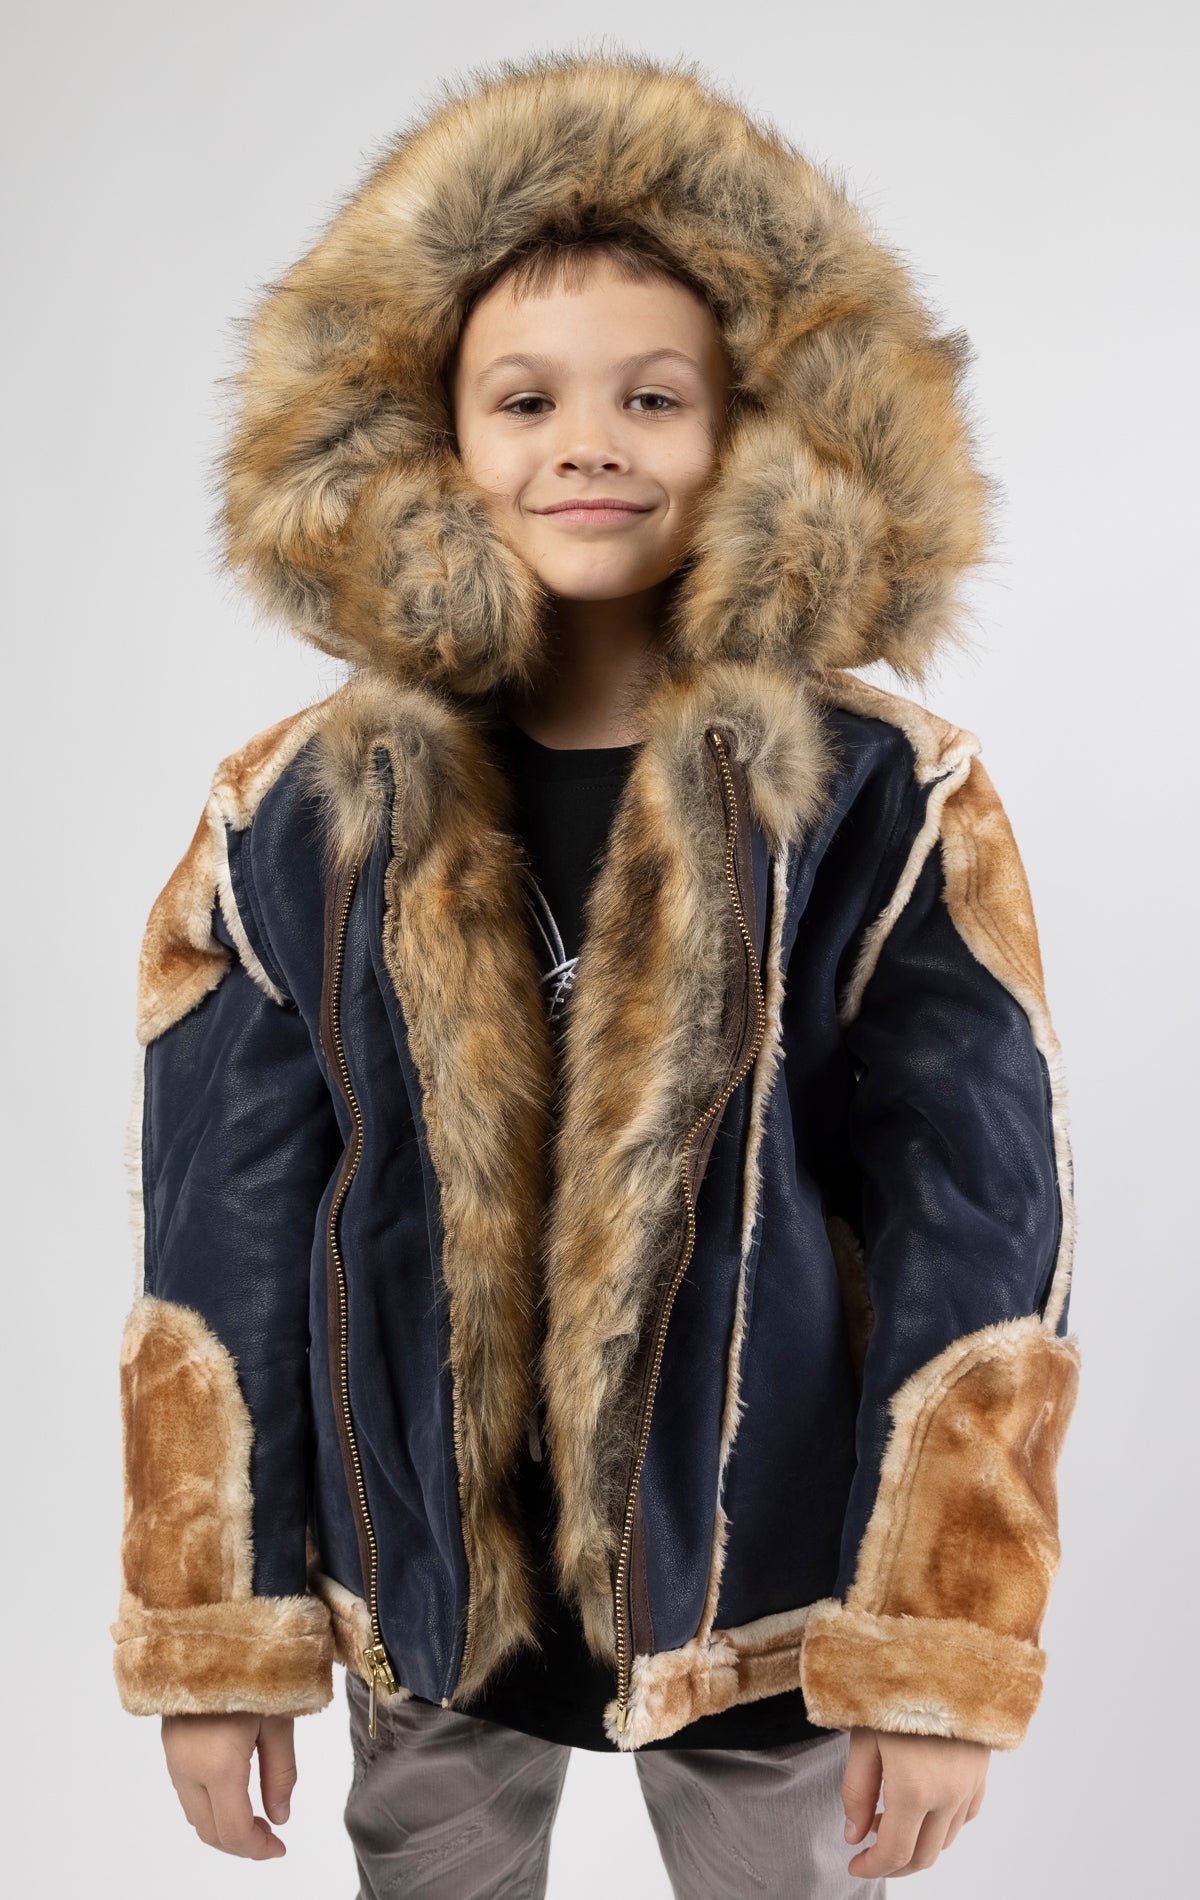 Faux suede body. Soft faux shearling lining on the body, sleeves, and pockets. Toggle front closure with vegan suede straps and a buckle at the neck. Detachable hood made of faux fox fur with a zipper.